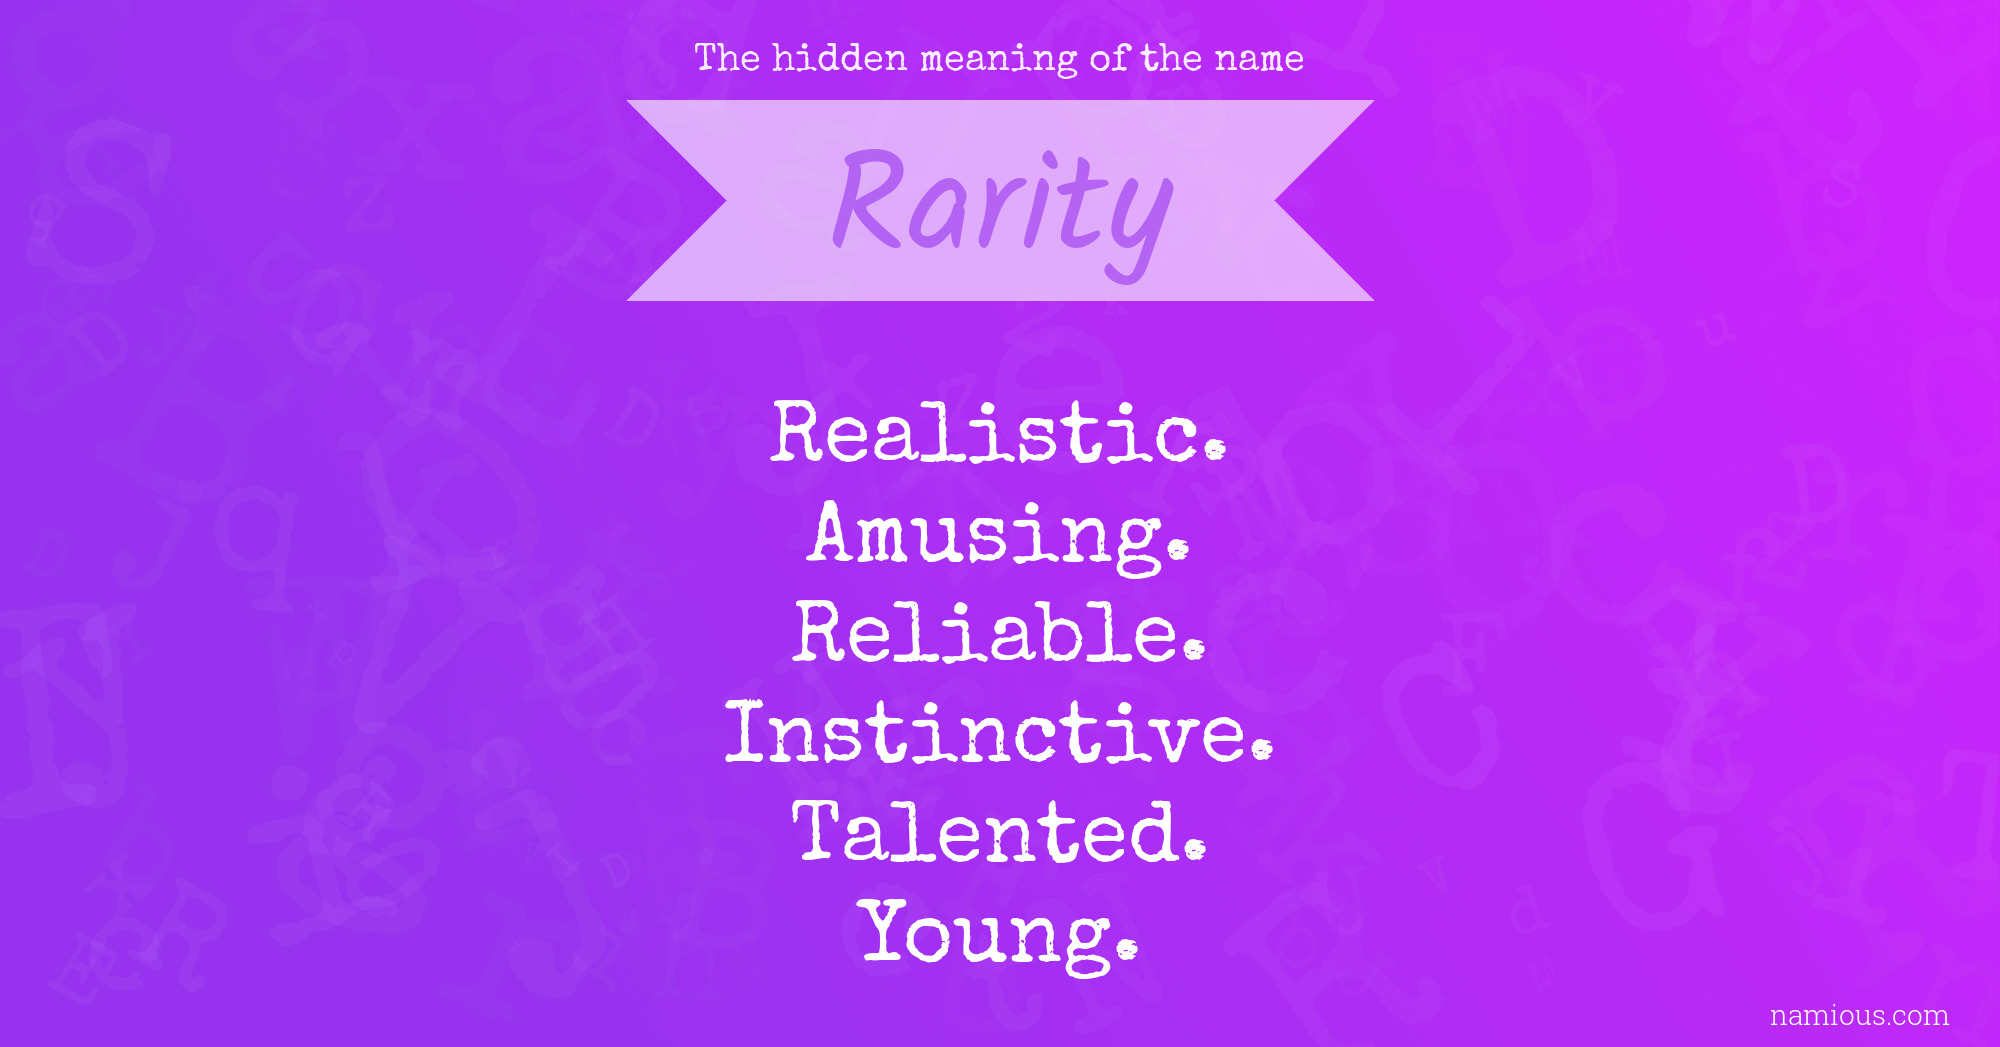 The hidden meaning of the name Rarity